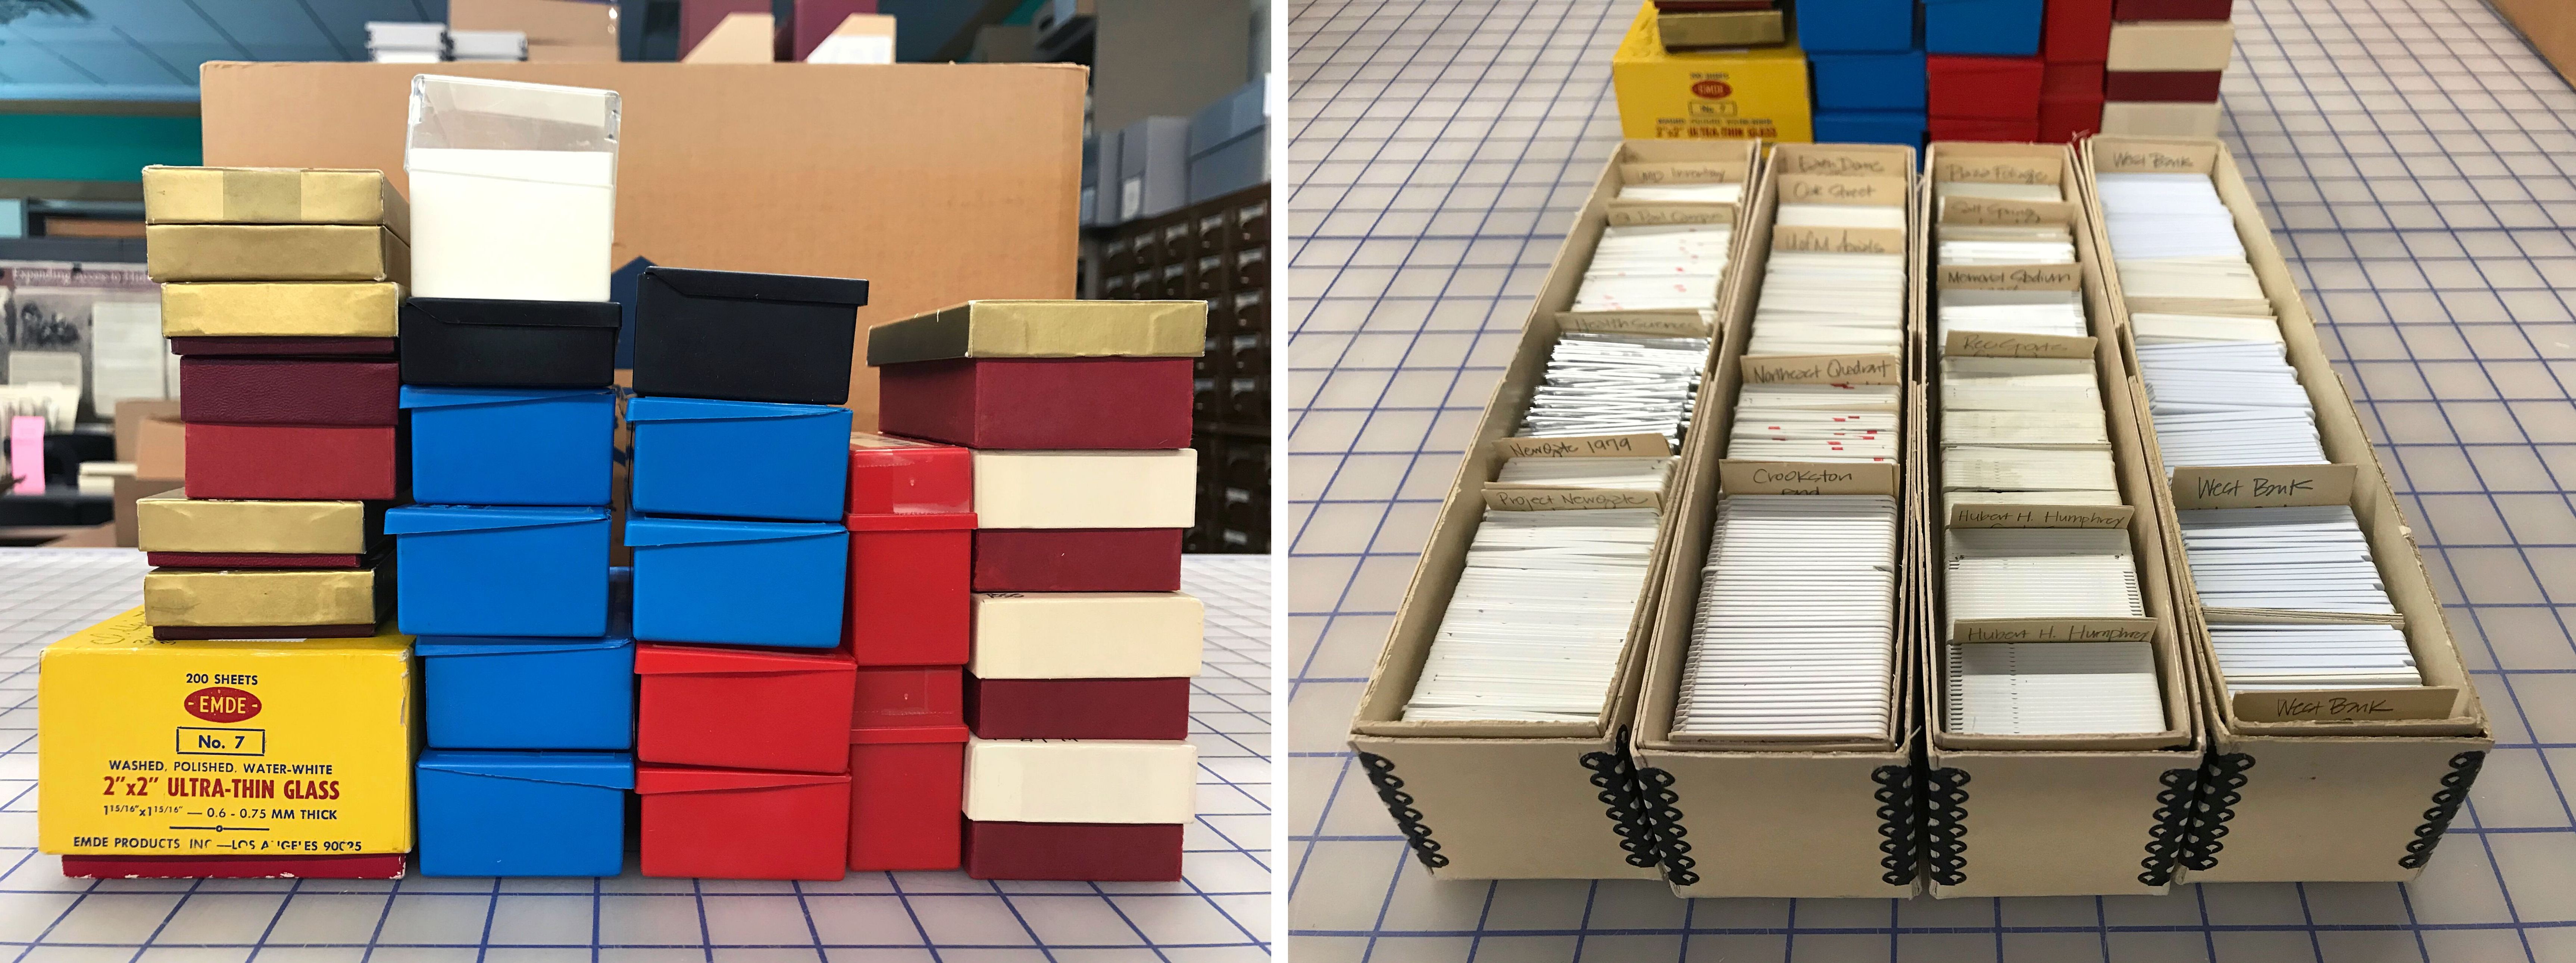 Stacks of colorful boxes filled with documents and slides from the Clint Hewitt archive